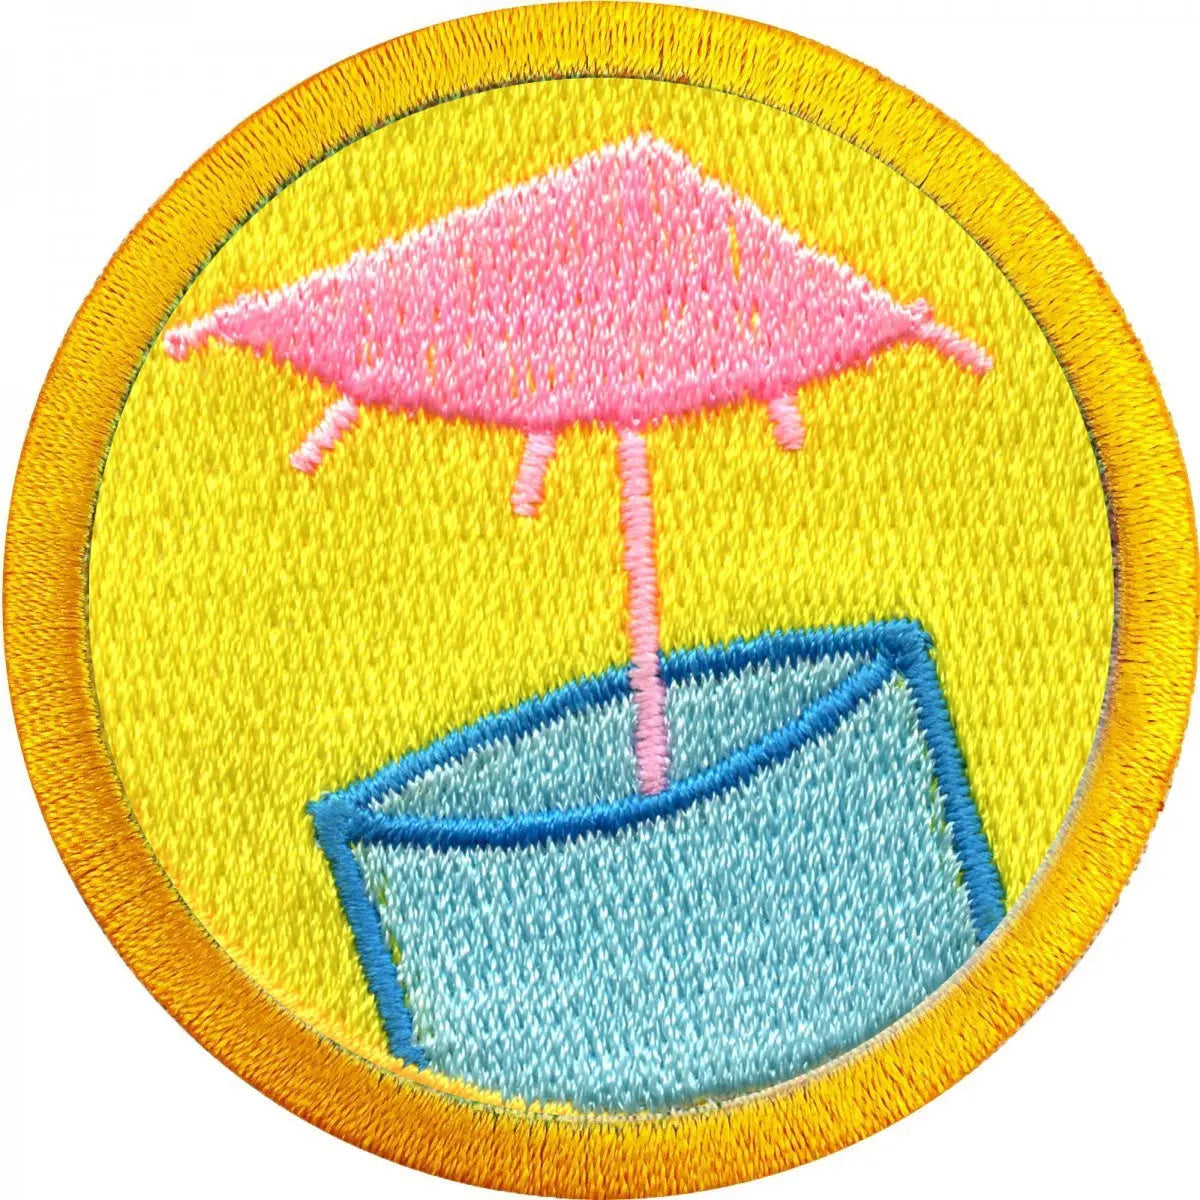 Relaxation Merit Badge Embroidered Iron-on Patch 